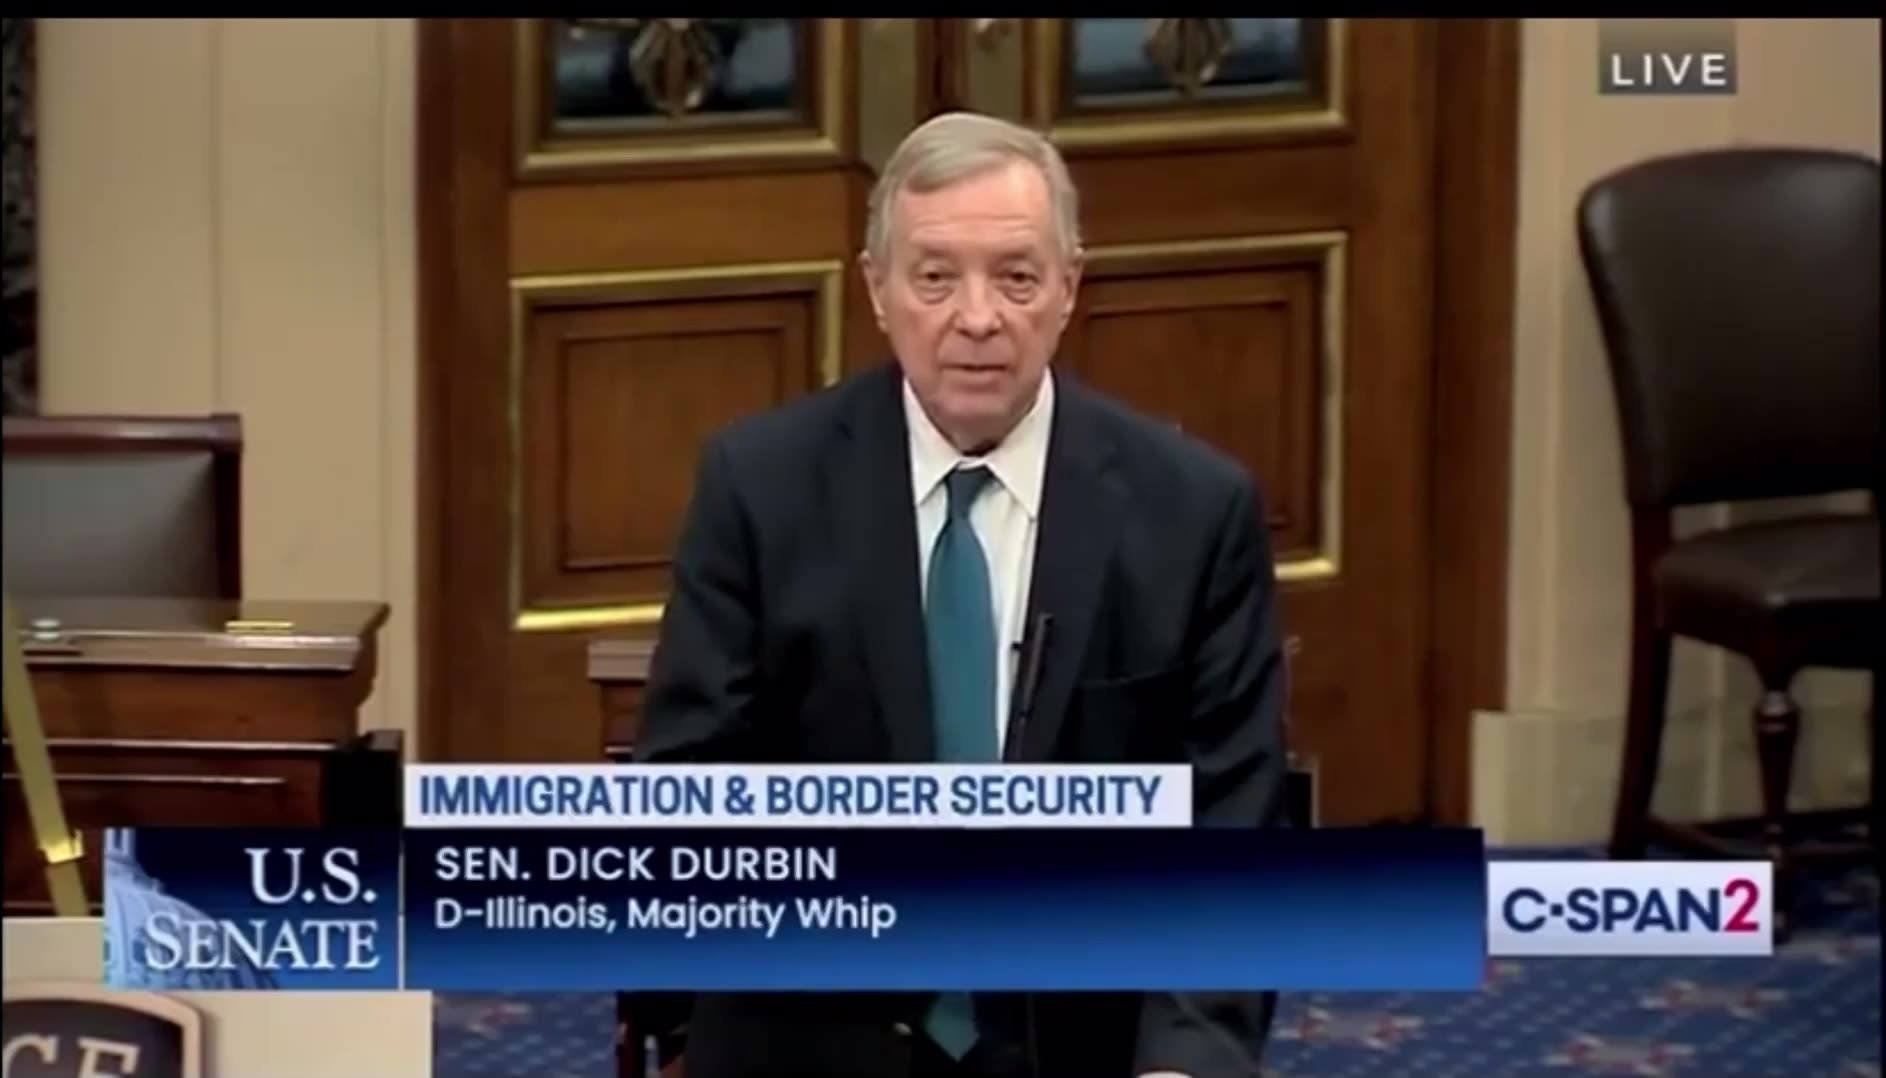 Dick Durbin Proposes Allowing Illegal Immigrants to Serve In the Military as a Path to Citizenship